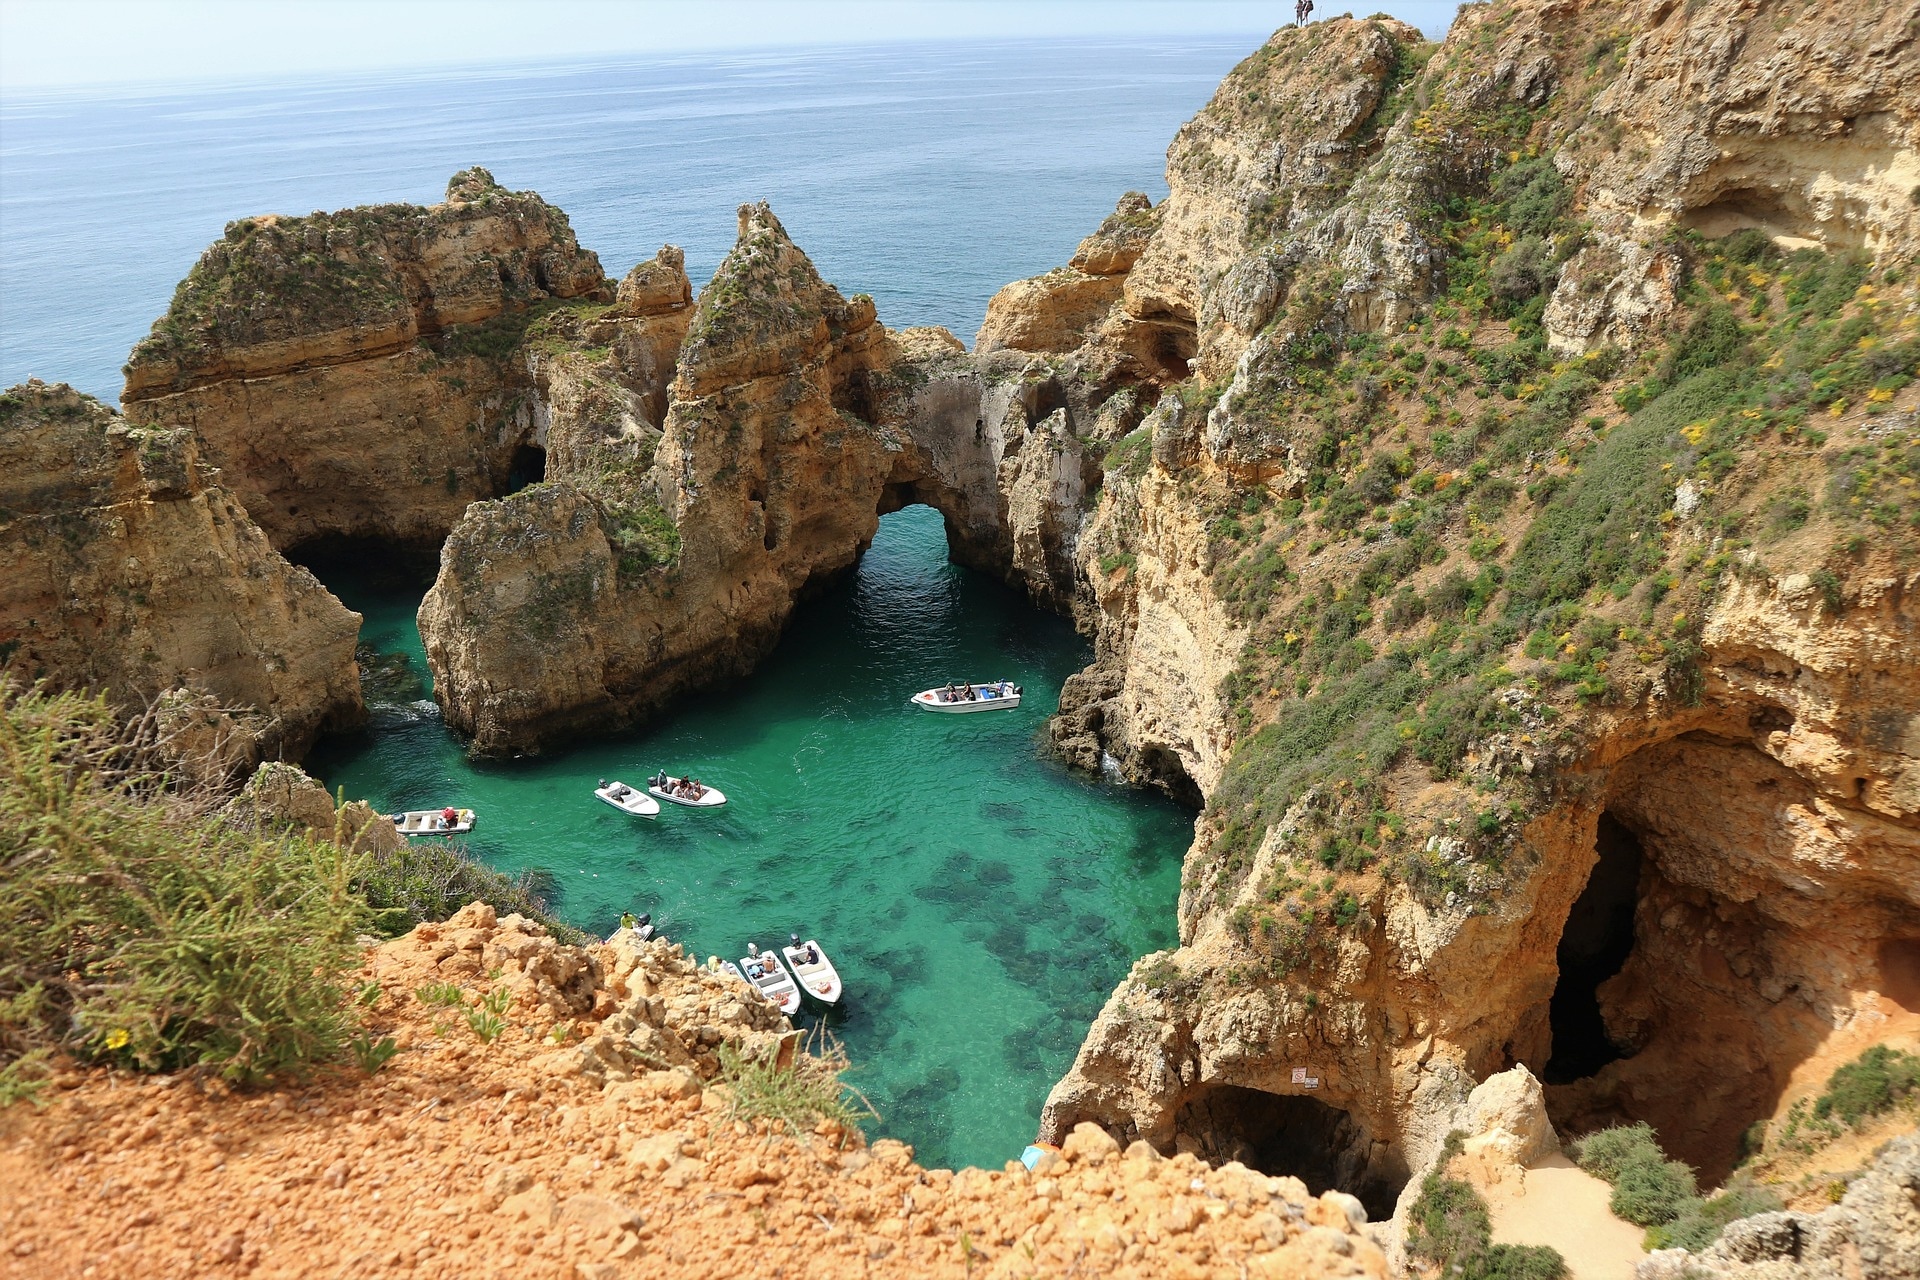 Ponta de Piedade is a picturesque location where brown-hued rock formations meet the below-surface waters of the Atlantic. (pixabay)